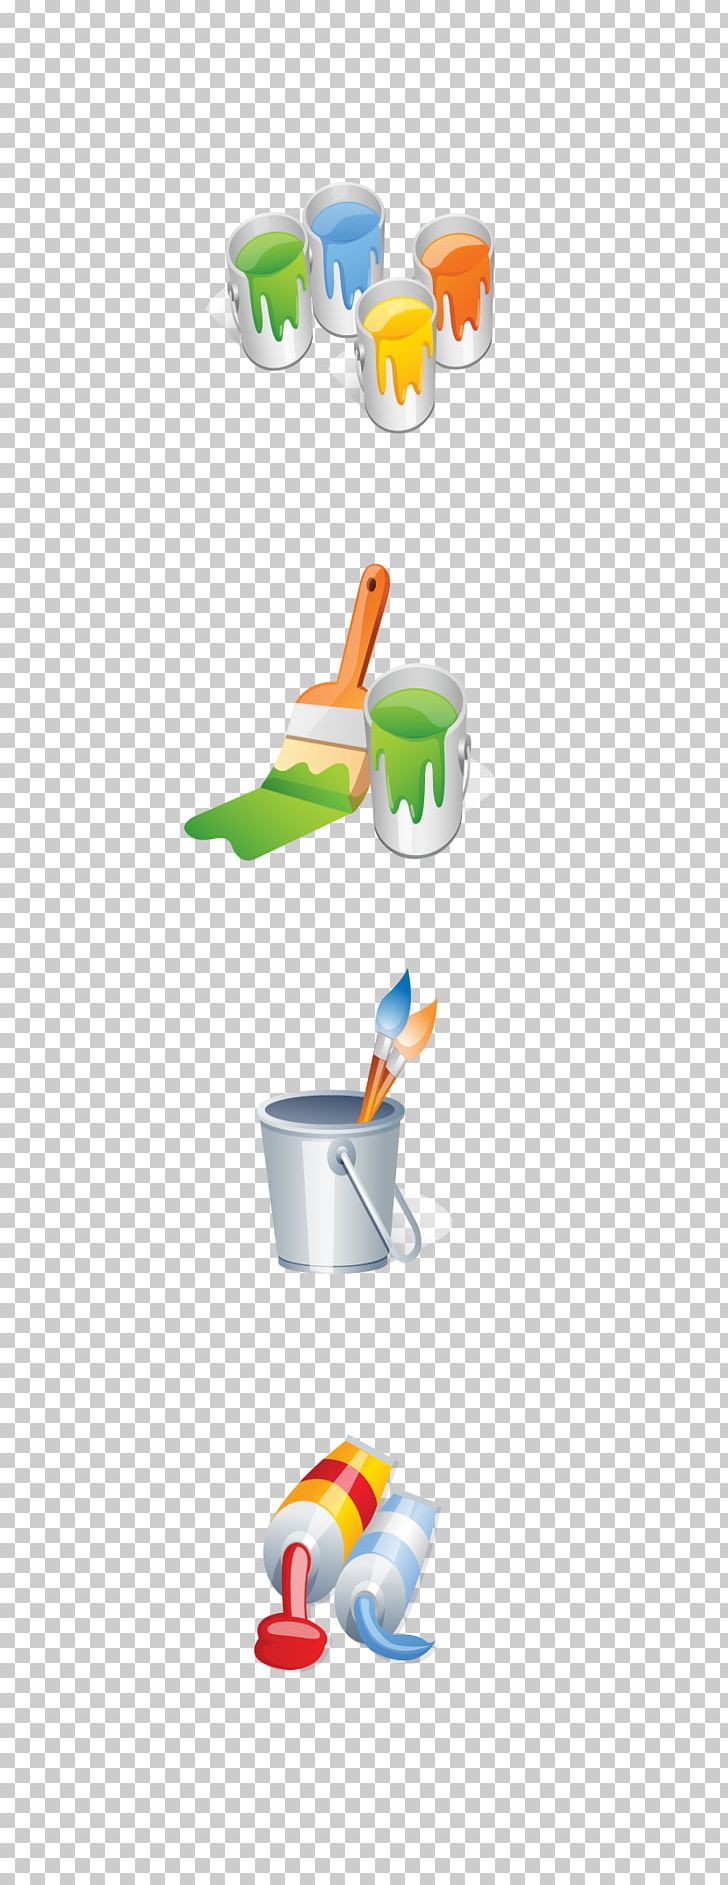 Painting Bucket PNG, Clipart, Bird, Brush, Bucket, Color, Encapsulated Postscript Free PNG Download